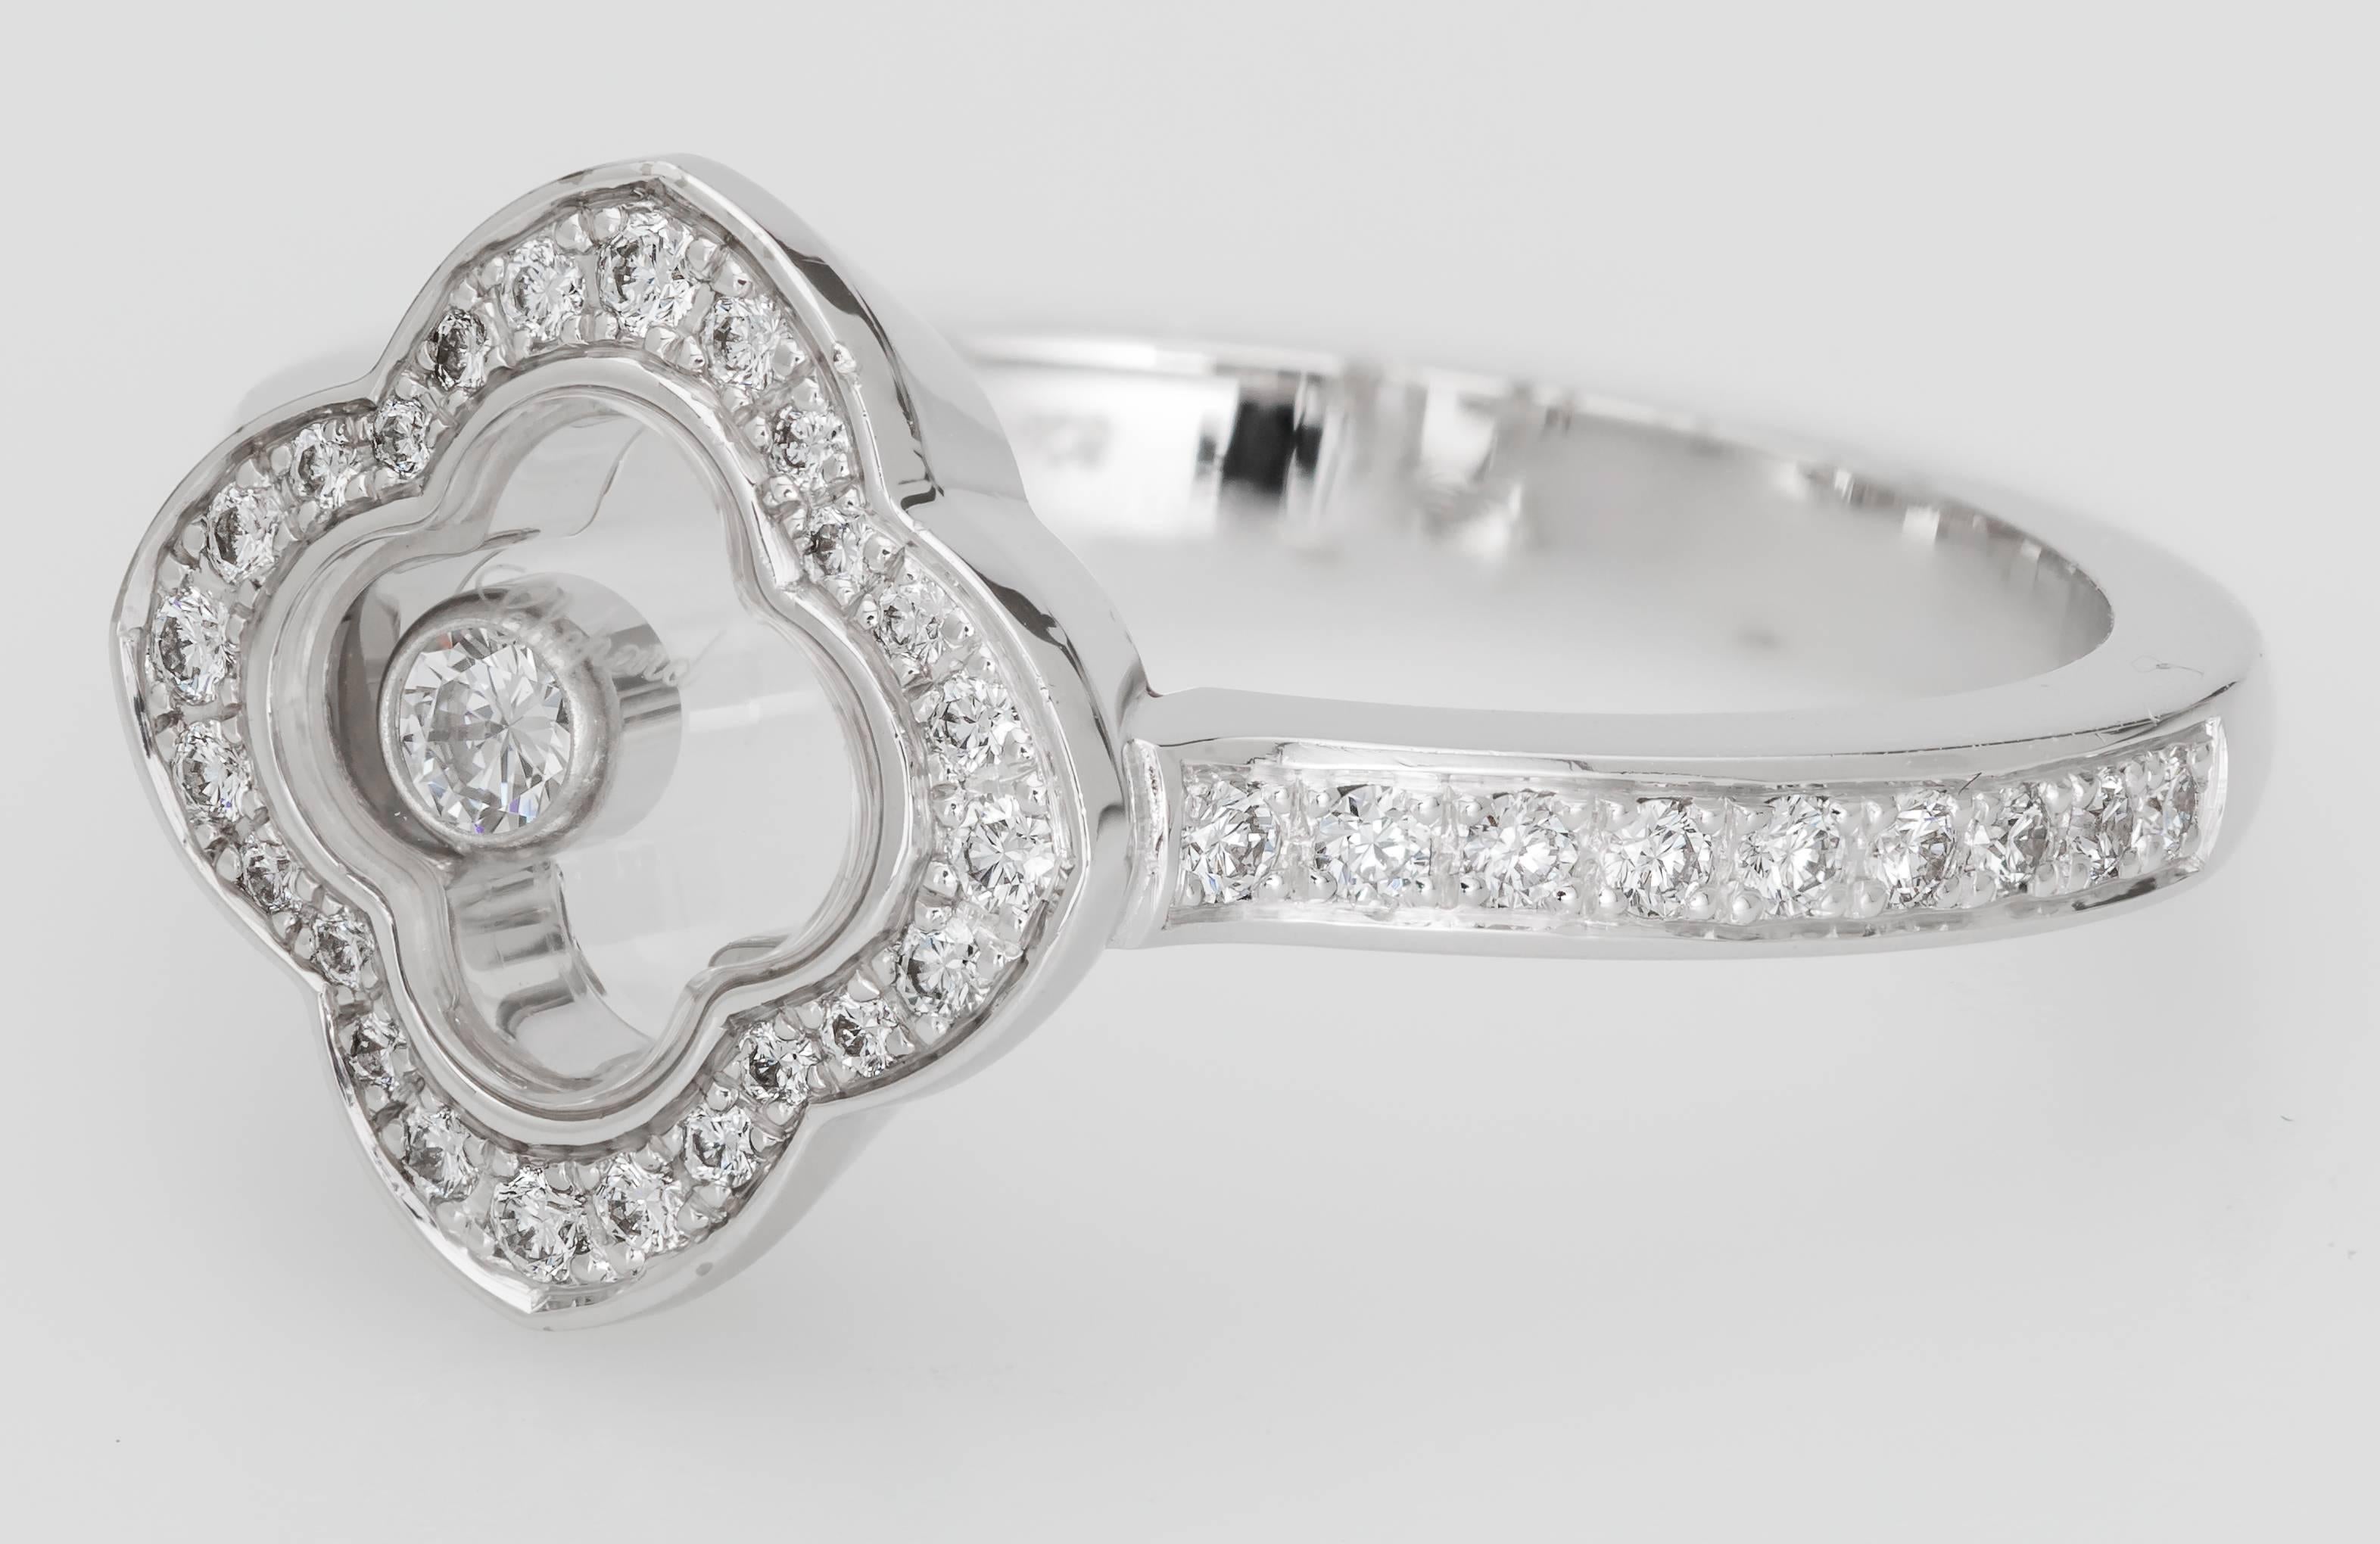 This new Chopard Happy Clover diamond ring features 42 diamonds totaling 0.20 carats and one floating 0.05 carat diamond.  The ring is 18K white gold and is a size 6.5.  It has some minor marks from being on display.